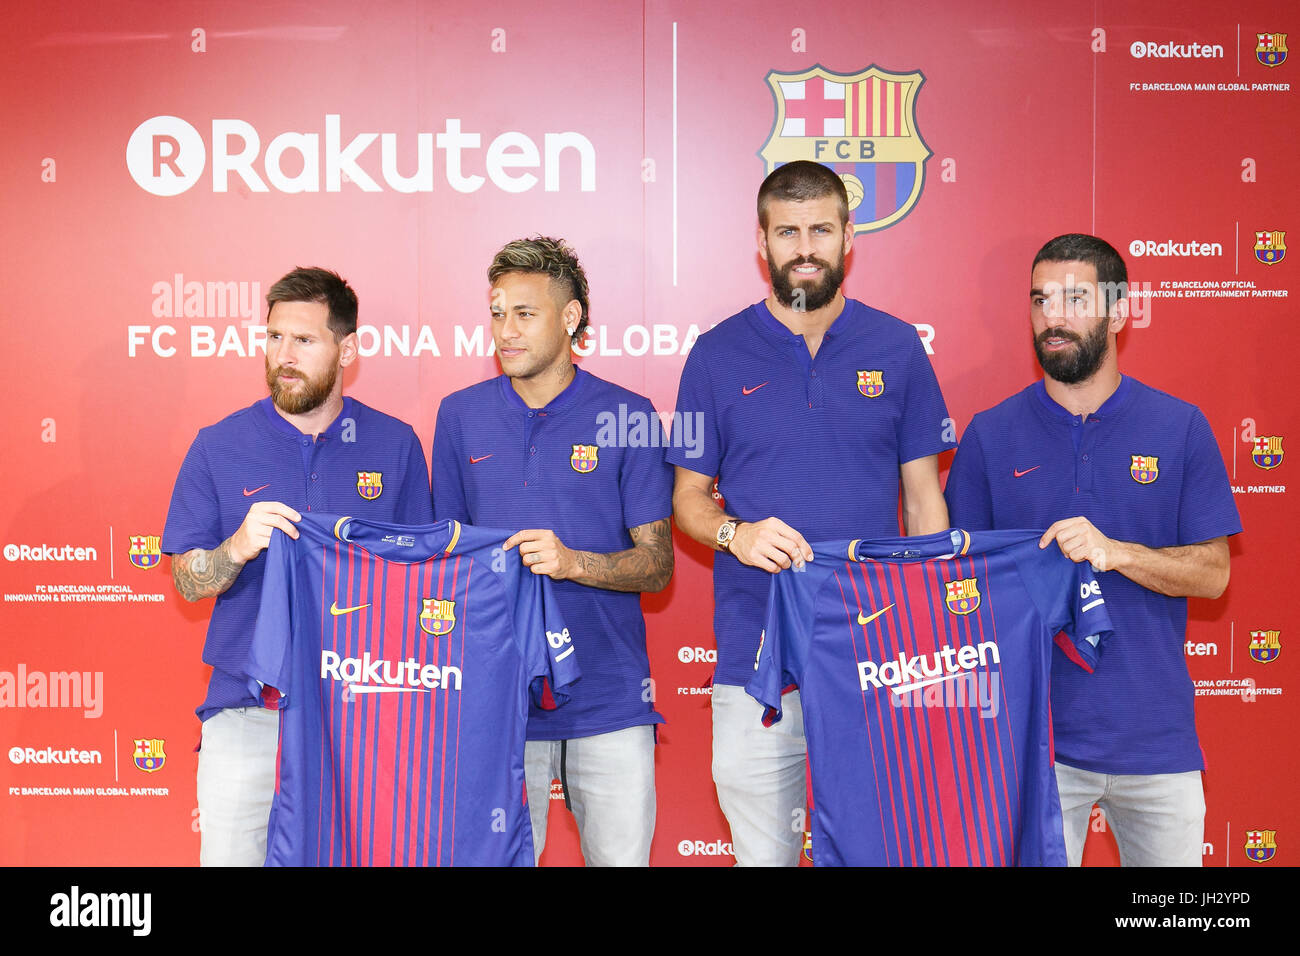 L to R) FC Barcelona players Lionel Messi, Neymar, Gerard Pique and Arda  Turan show off the club's new 2017-18 season uniform during a press event  at Rakuten Crimson House headquarters in